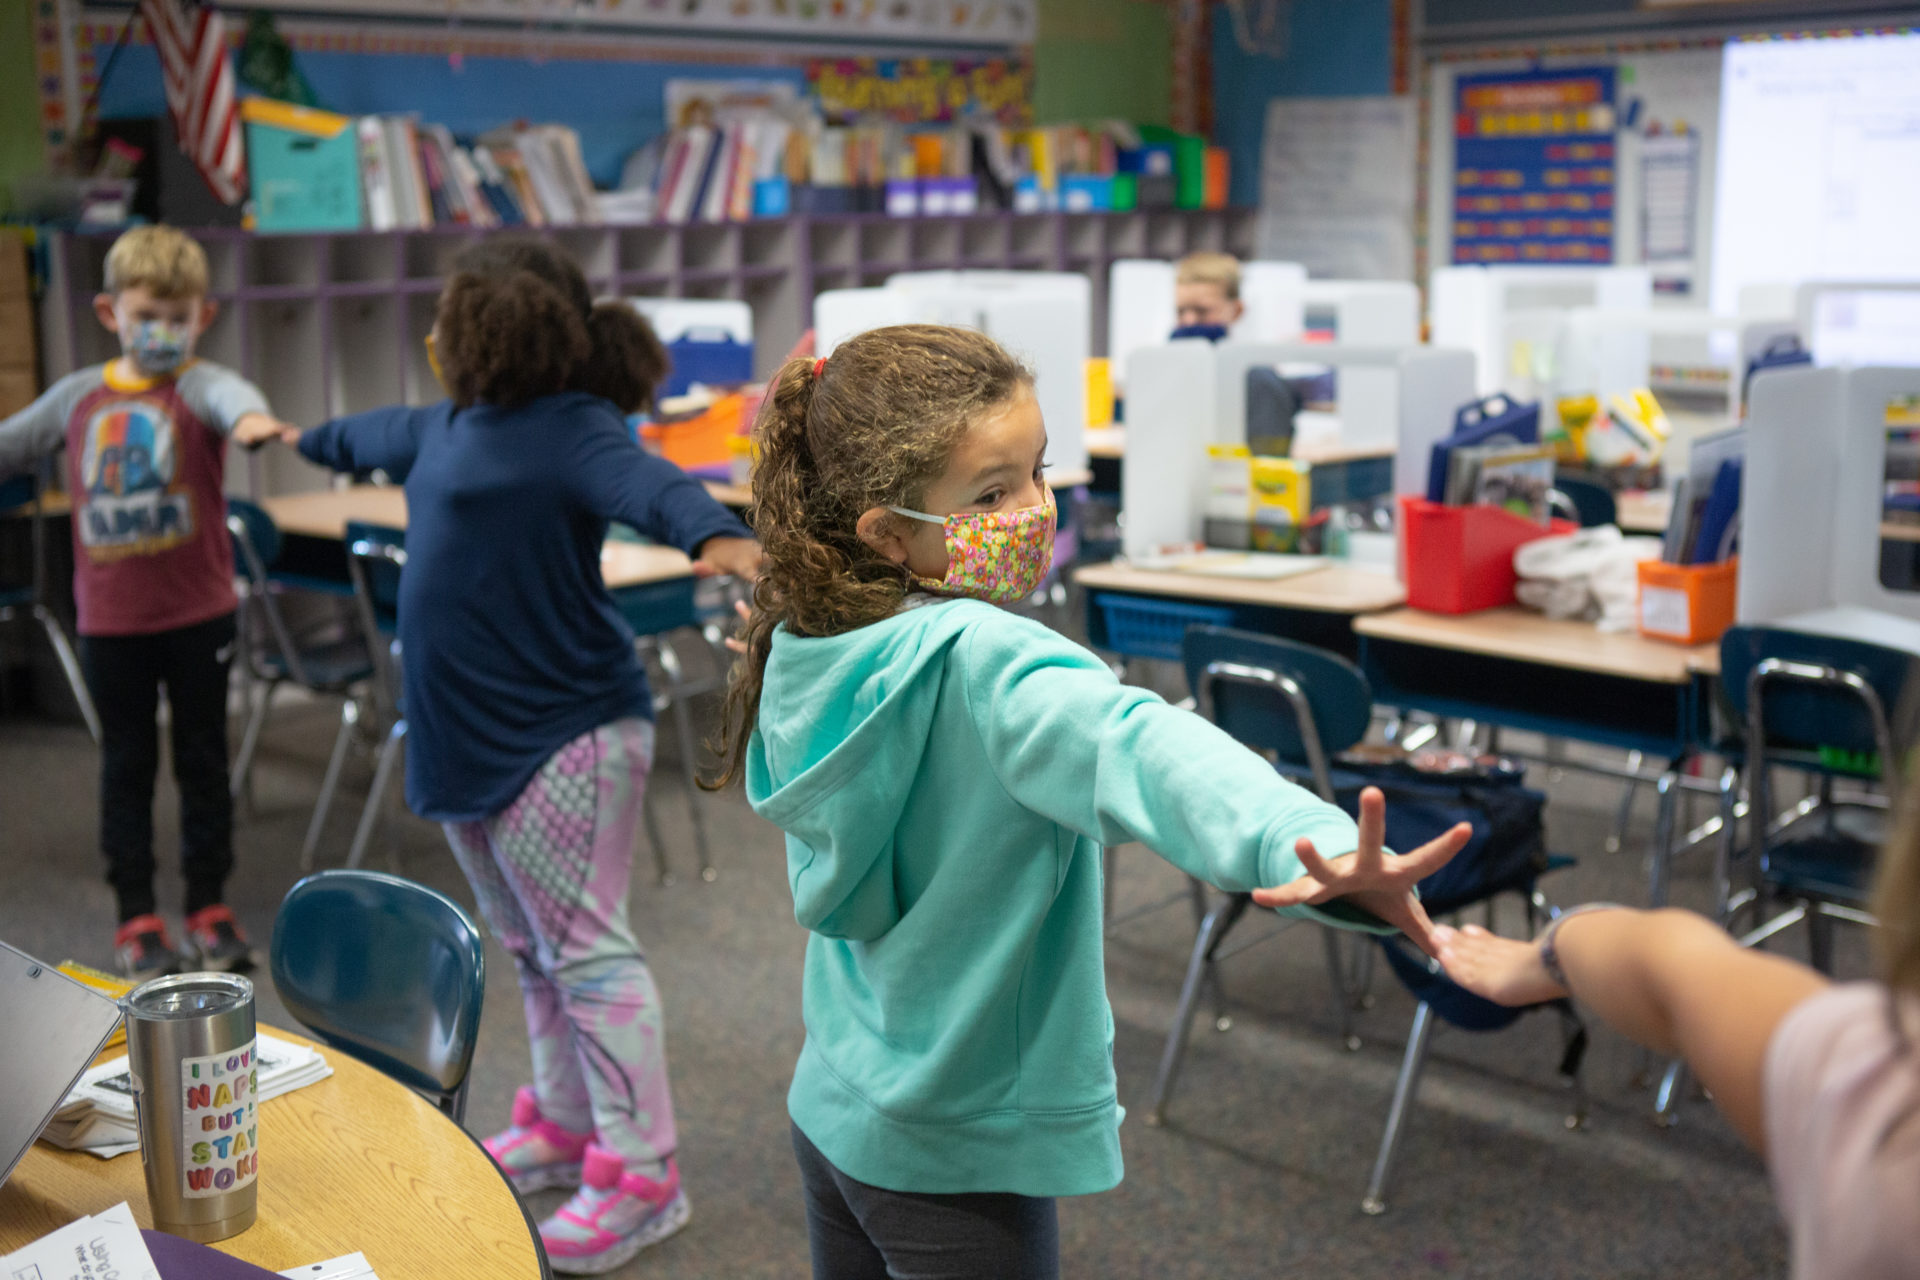 Second graders create distance between each other